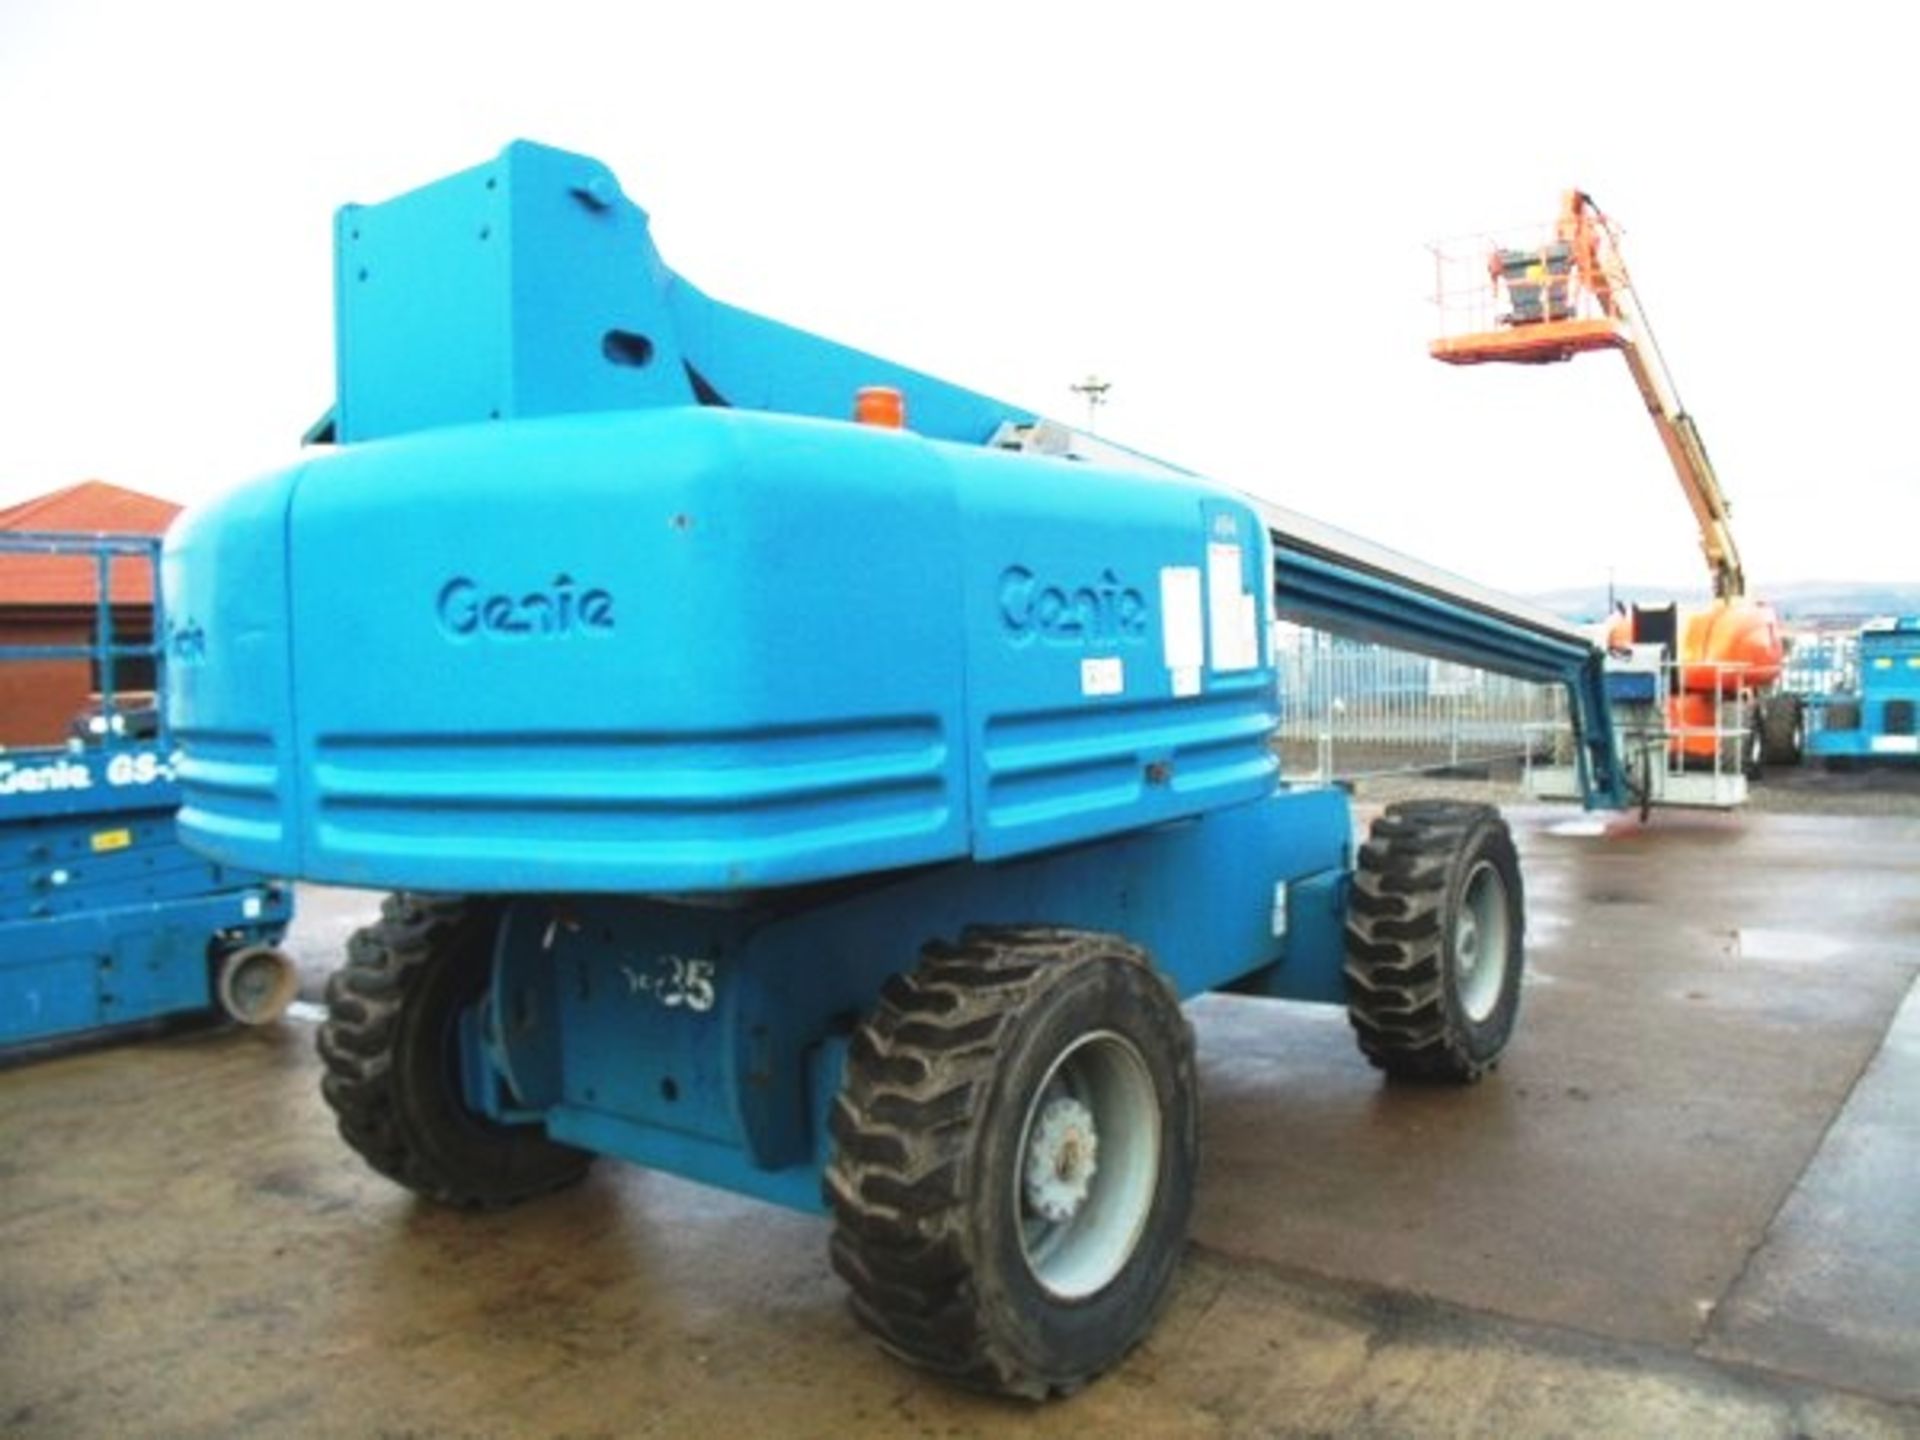 1999 GENIE 4X4 S85, s/n -1256, 5795hrs (verified), new alternator fitted 4 months ago, solid tyres. - Image 4 of 11